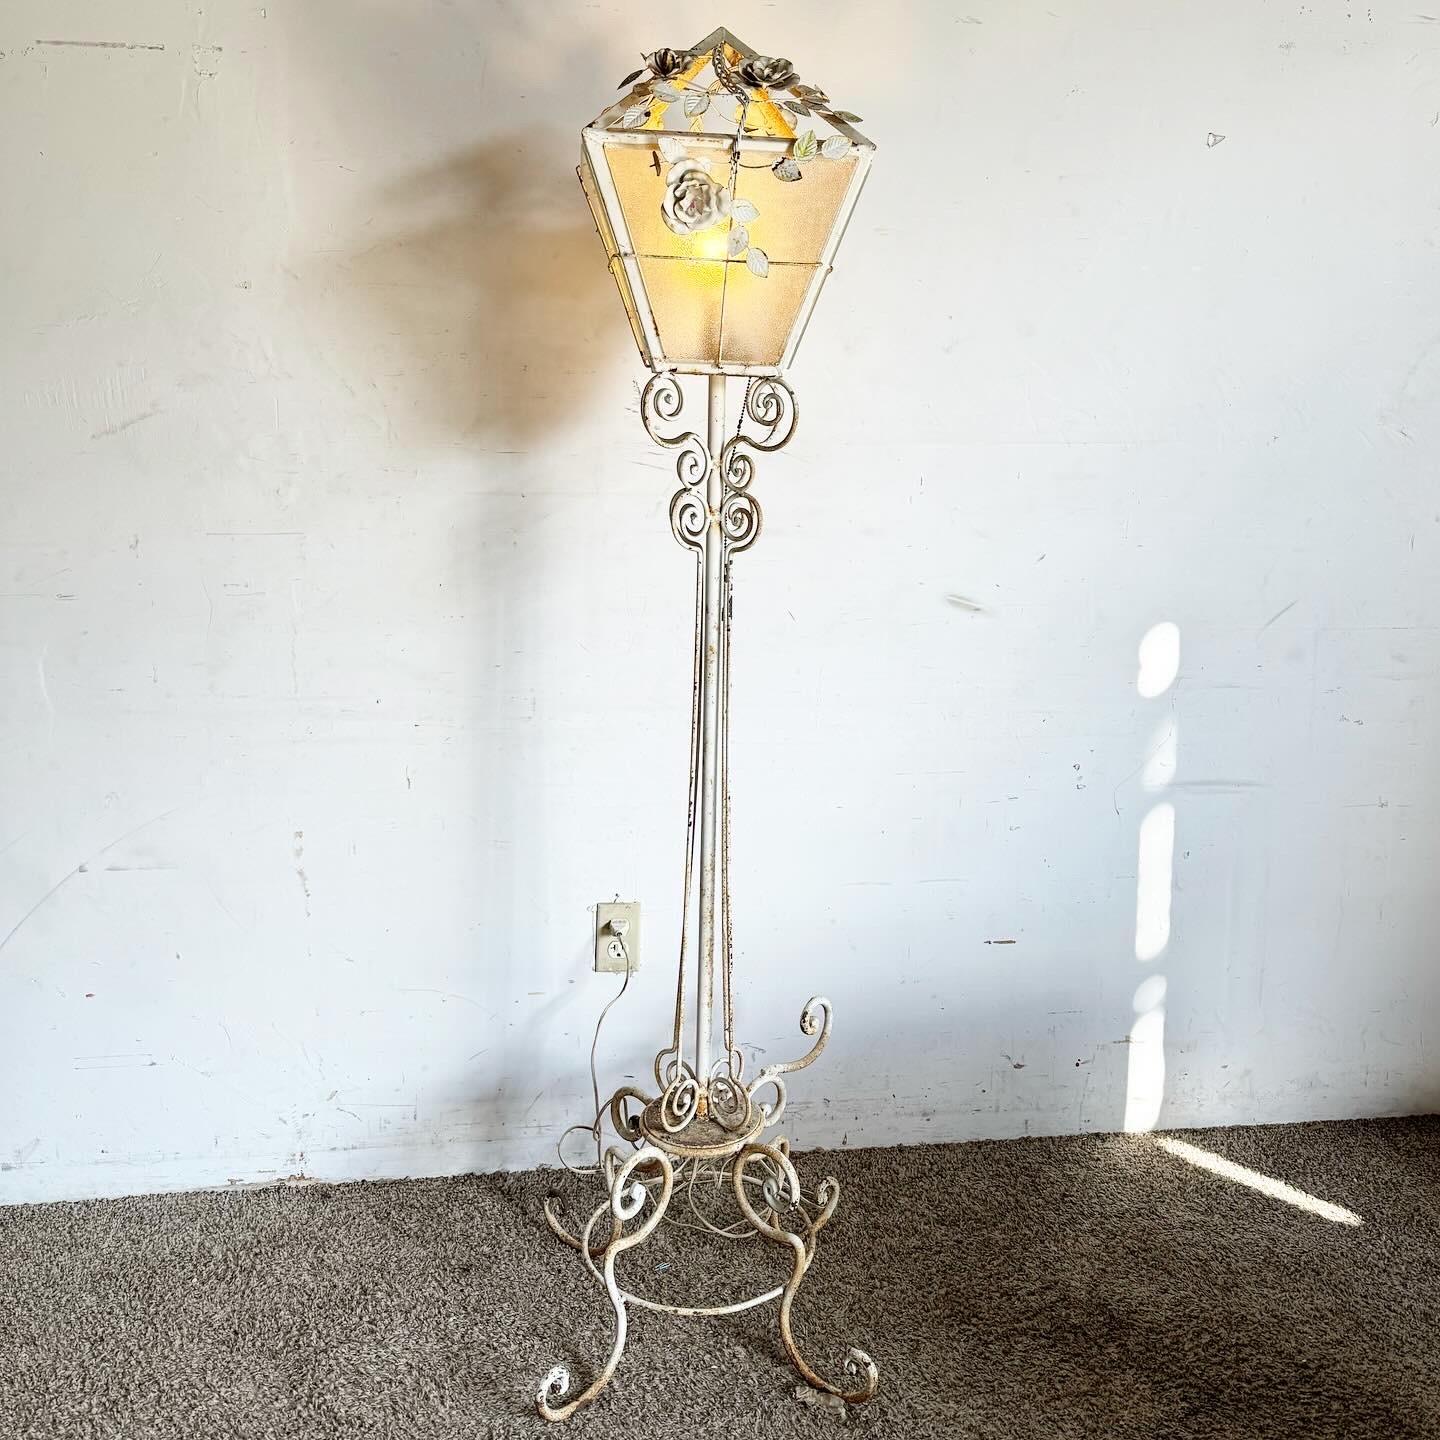 Illuminate your space with a Vintage White Wrought Iron Lamp, blending timeless elegance with classic design.